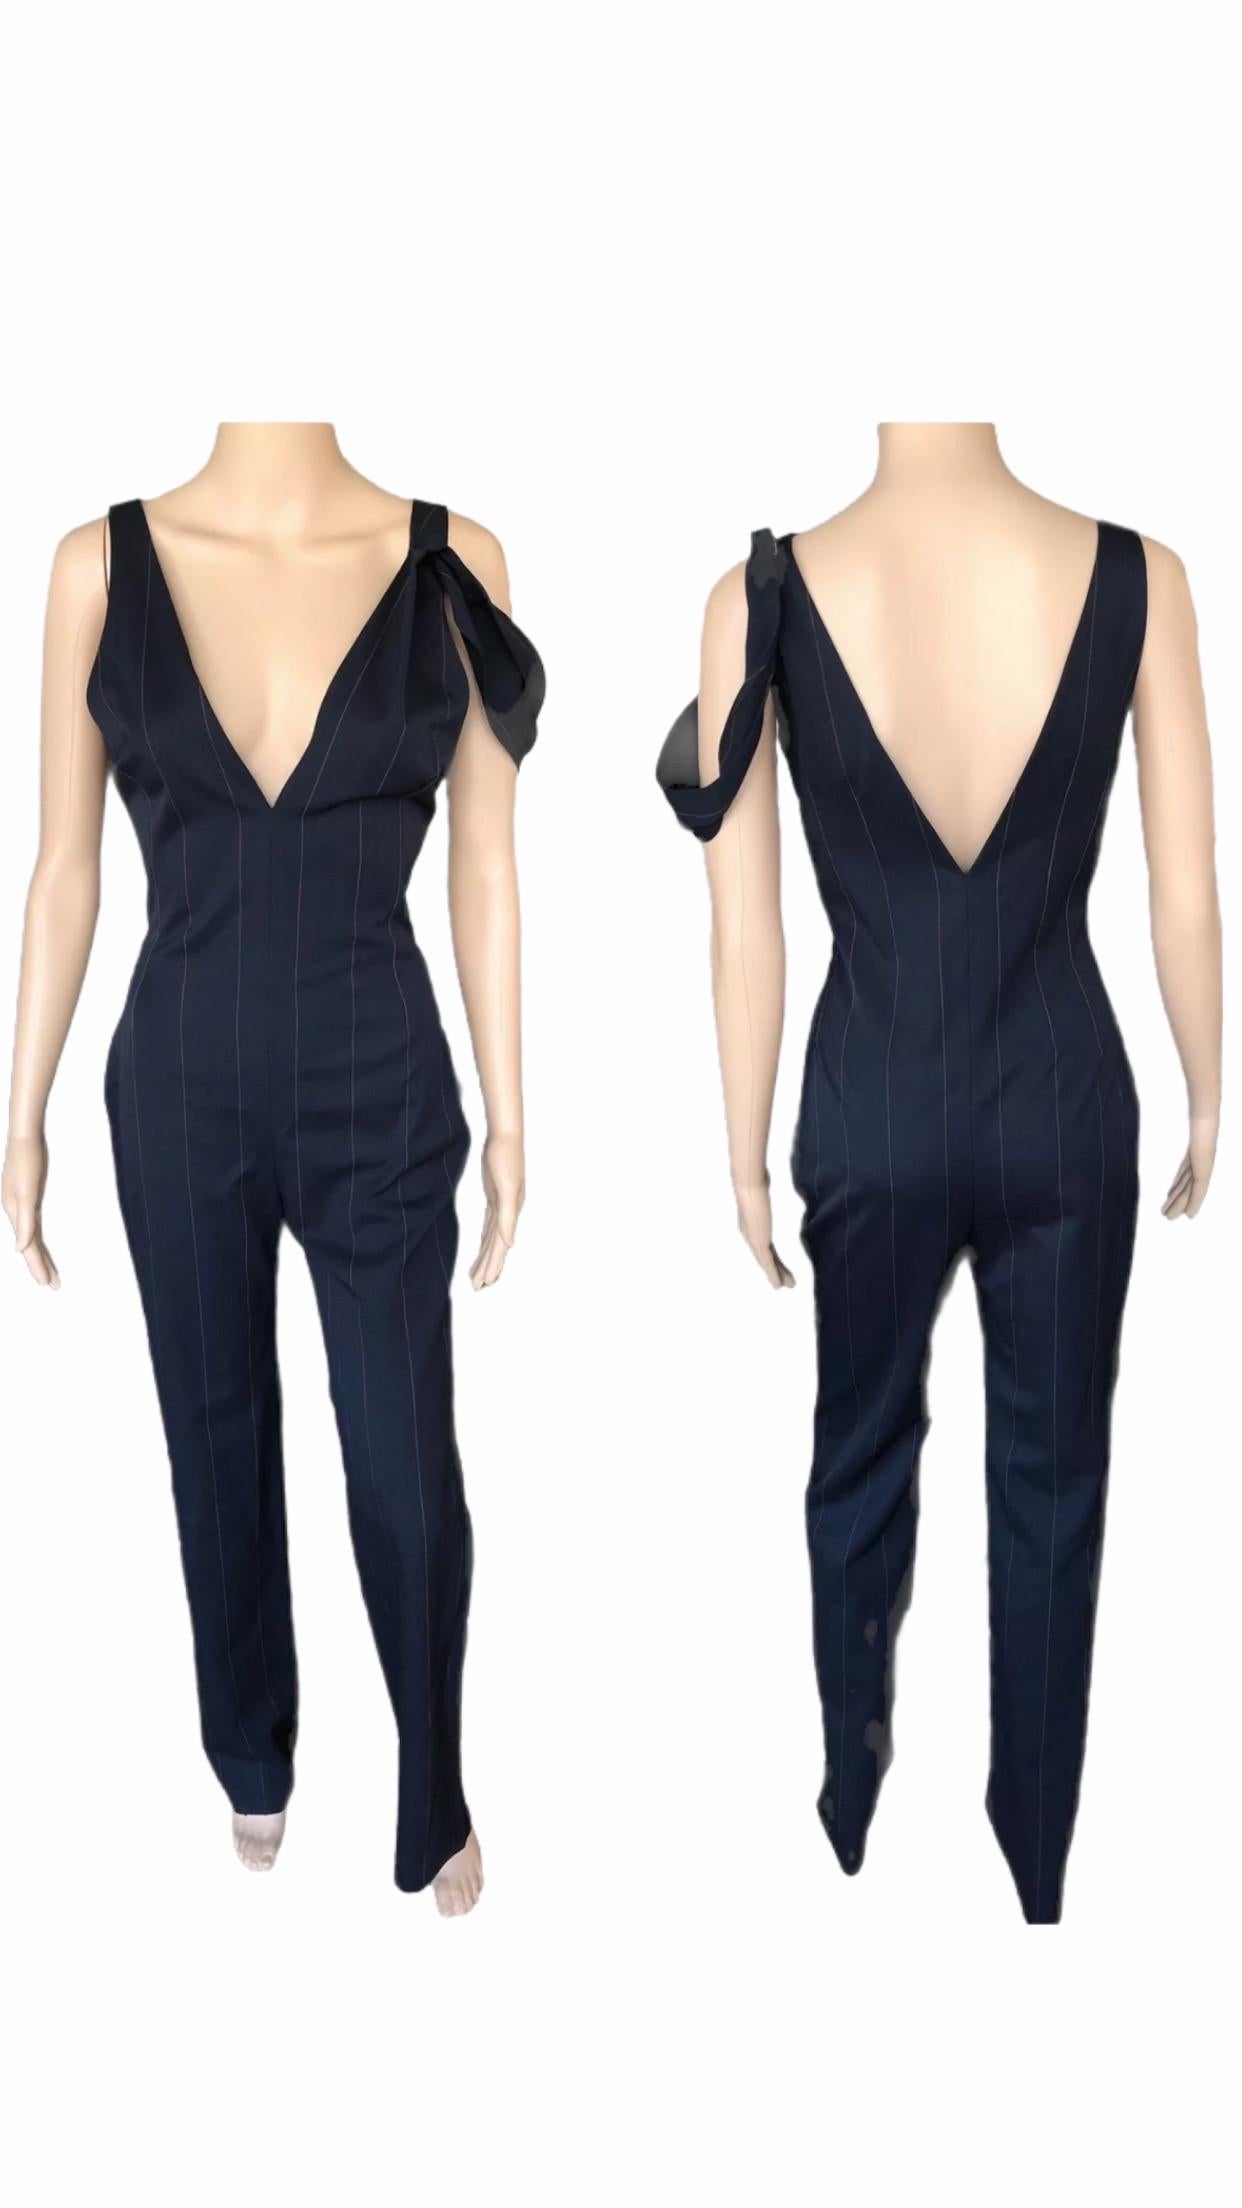 Gianni Versace F/W 1998 Vintage Pinstriped Plunging Open Back Jumpsuit IT 38